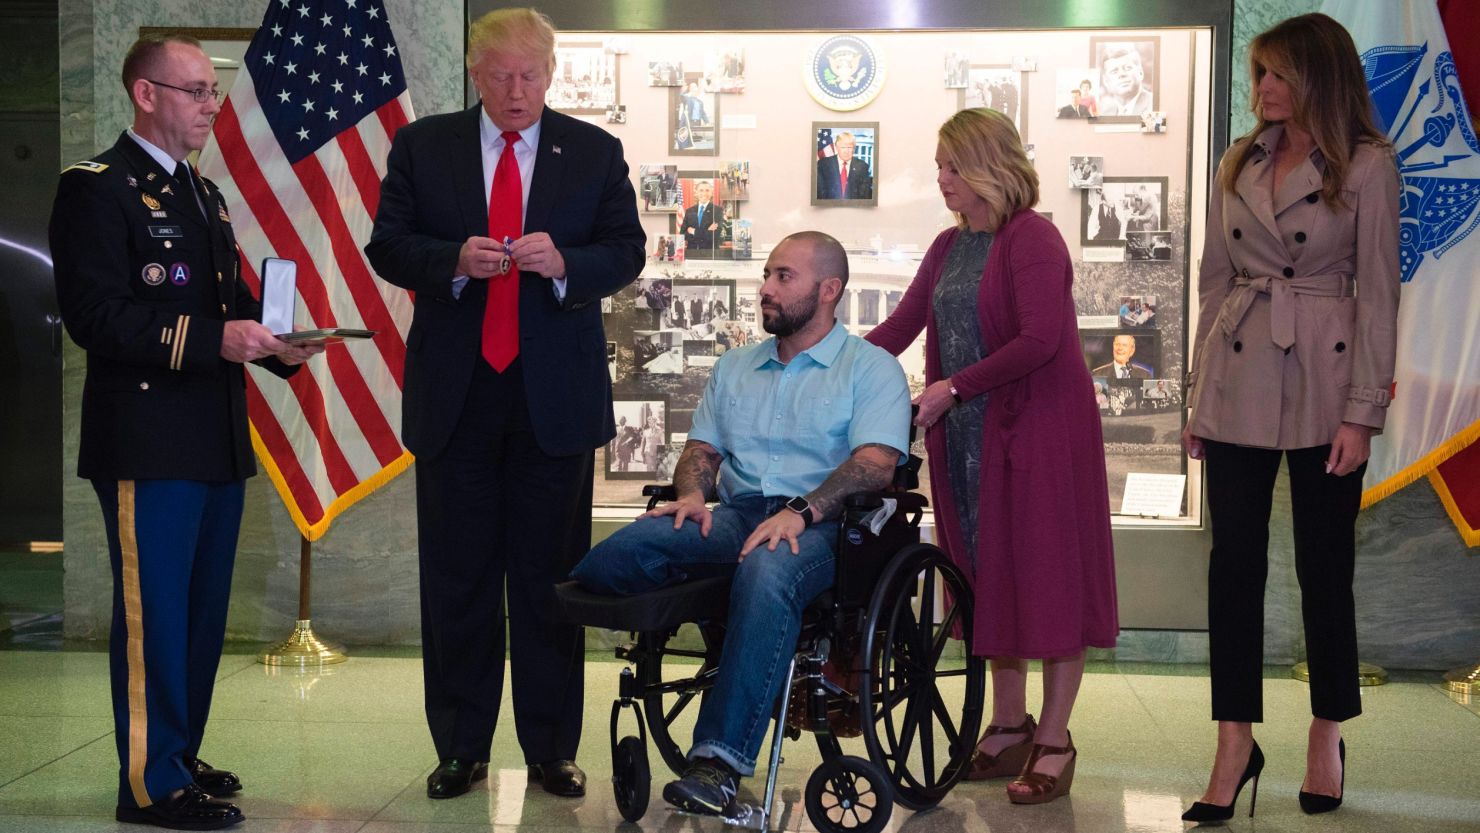 US President Donald Trump awards the purple heart to Sergeant First Class Alvaro Barrientos as first lady Melania Trump and Barrientos' wife Tammy stand by. 